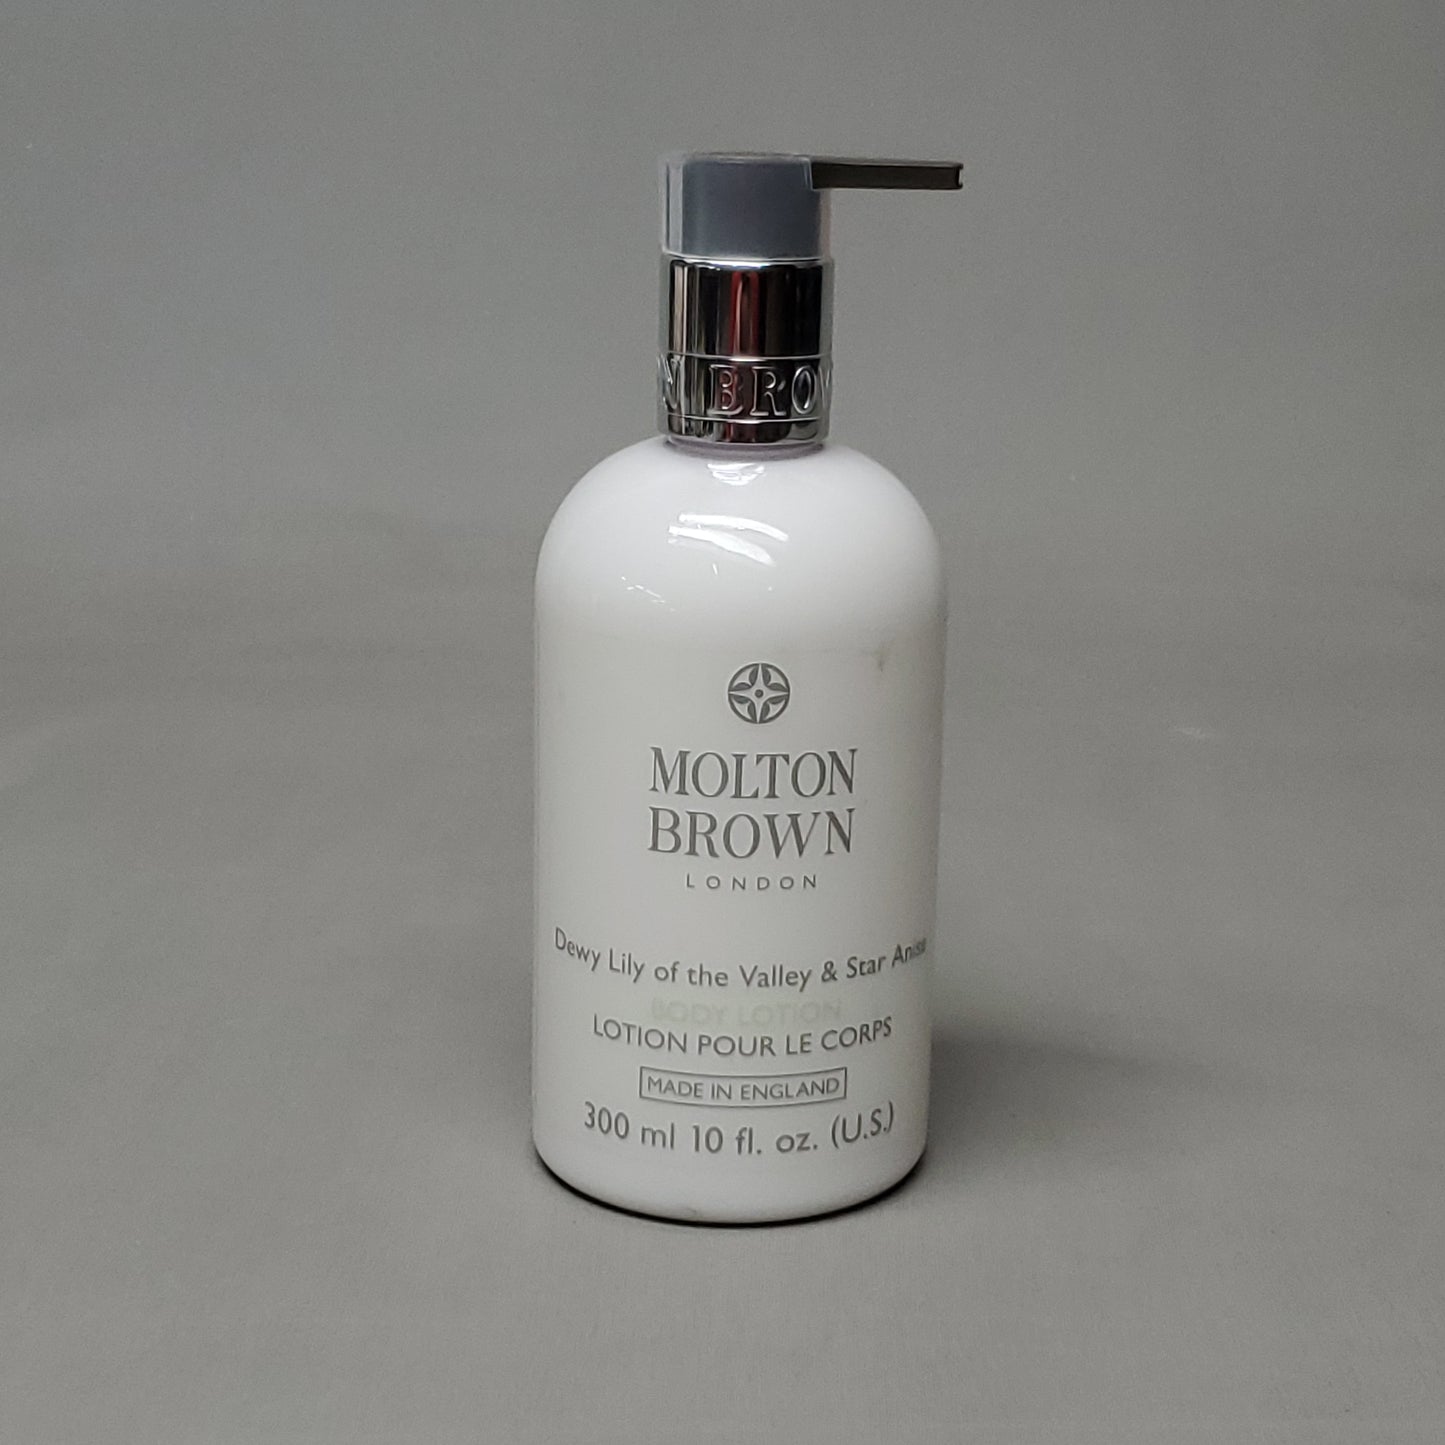 MOLTON BROWN London Body Lotion Dewy Lily of the Valley & Star Anise 10 fl oz (New)